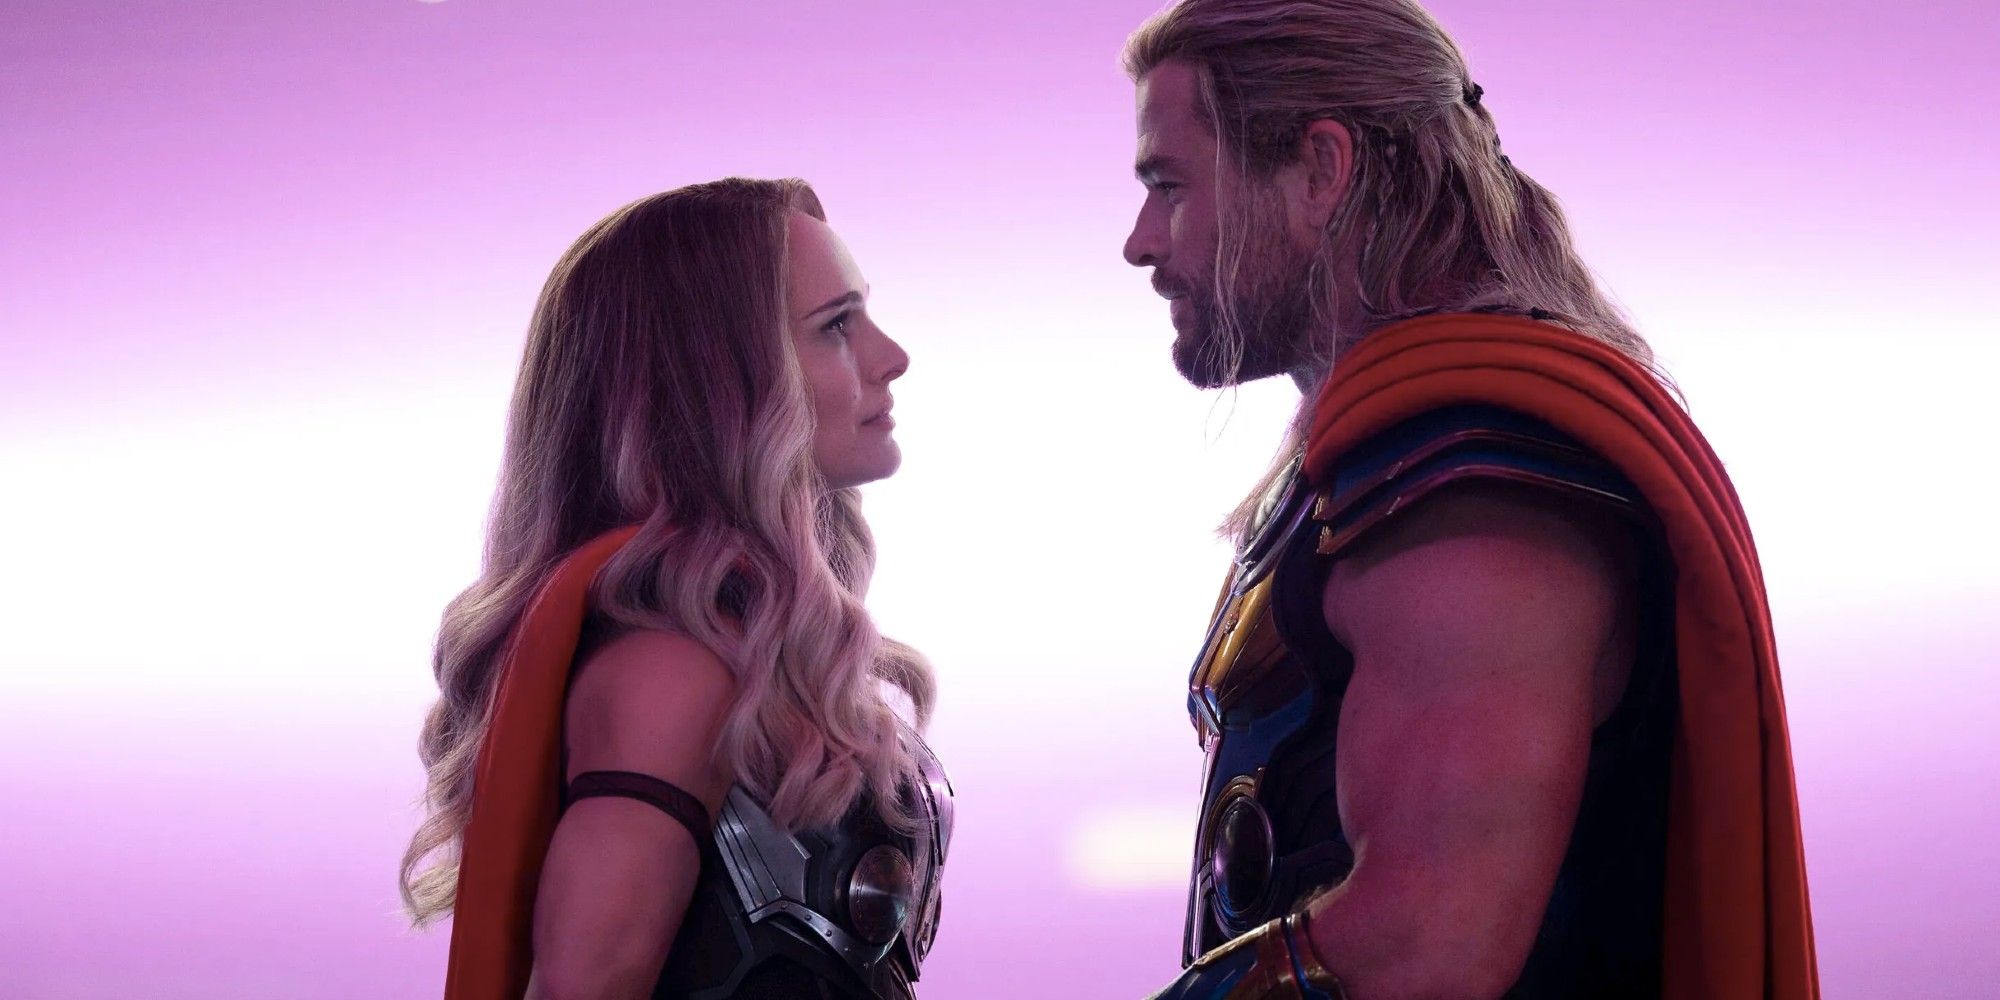 Natalie Portman as Jane Foster and Chris Hemsworth as Thor about to kiss in 'Thor - Love and Thunder'